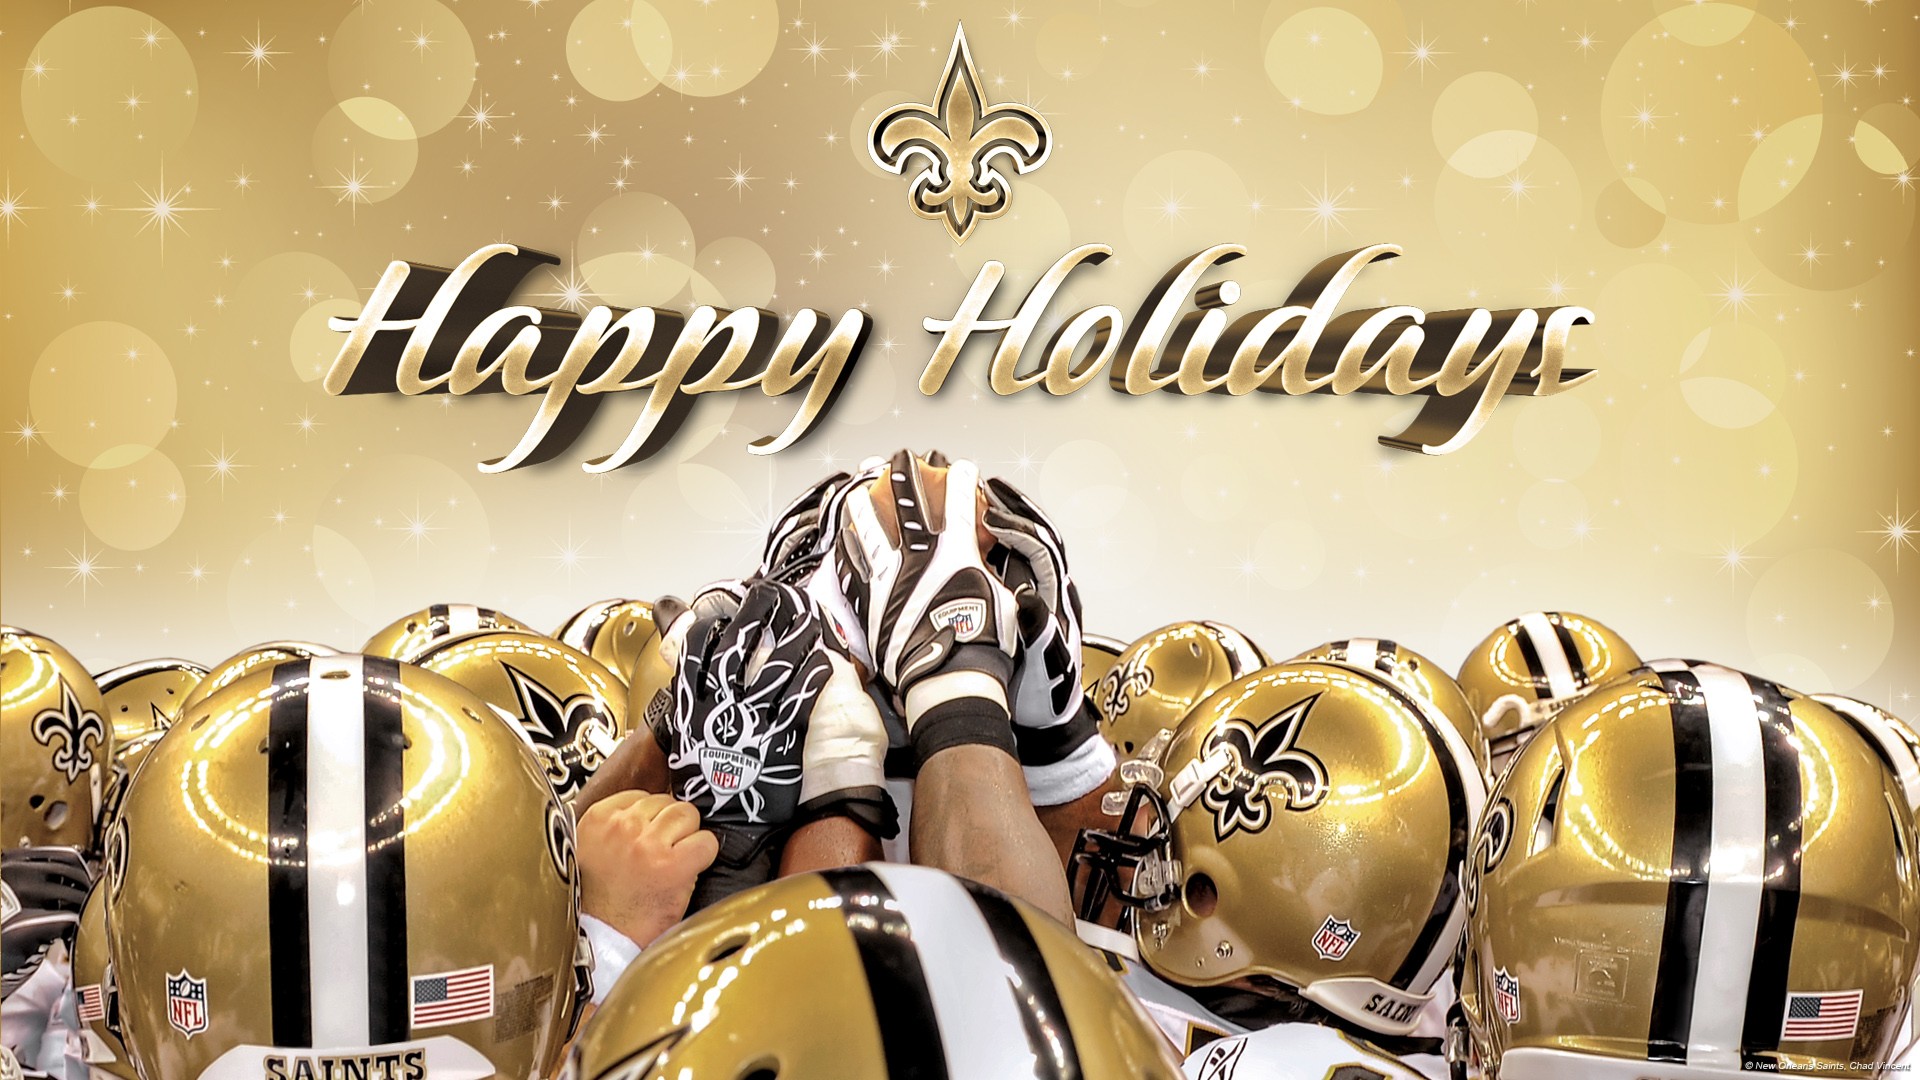 New Orleans Saints Desktop Wallpapers with resolution 1920x1080 pixel. You can make this wallpaper for your Mac or Windows Desktop Background, iPhone, Android or Tablet and another Smartphone device